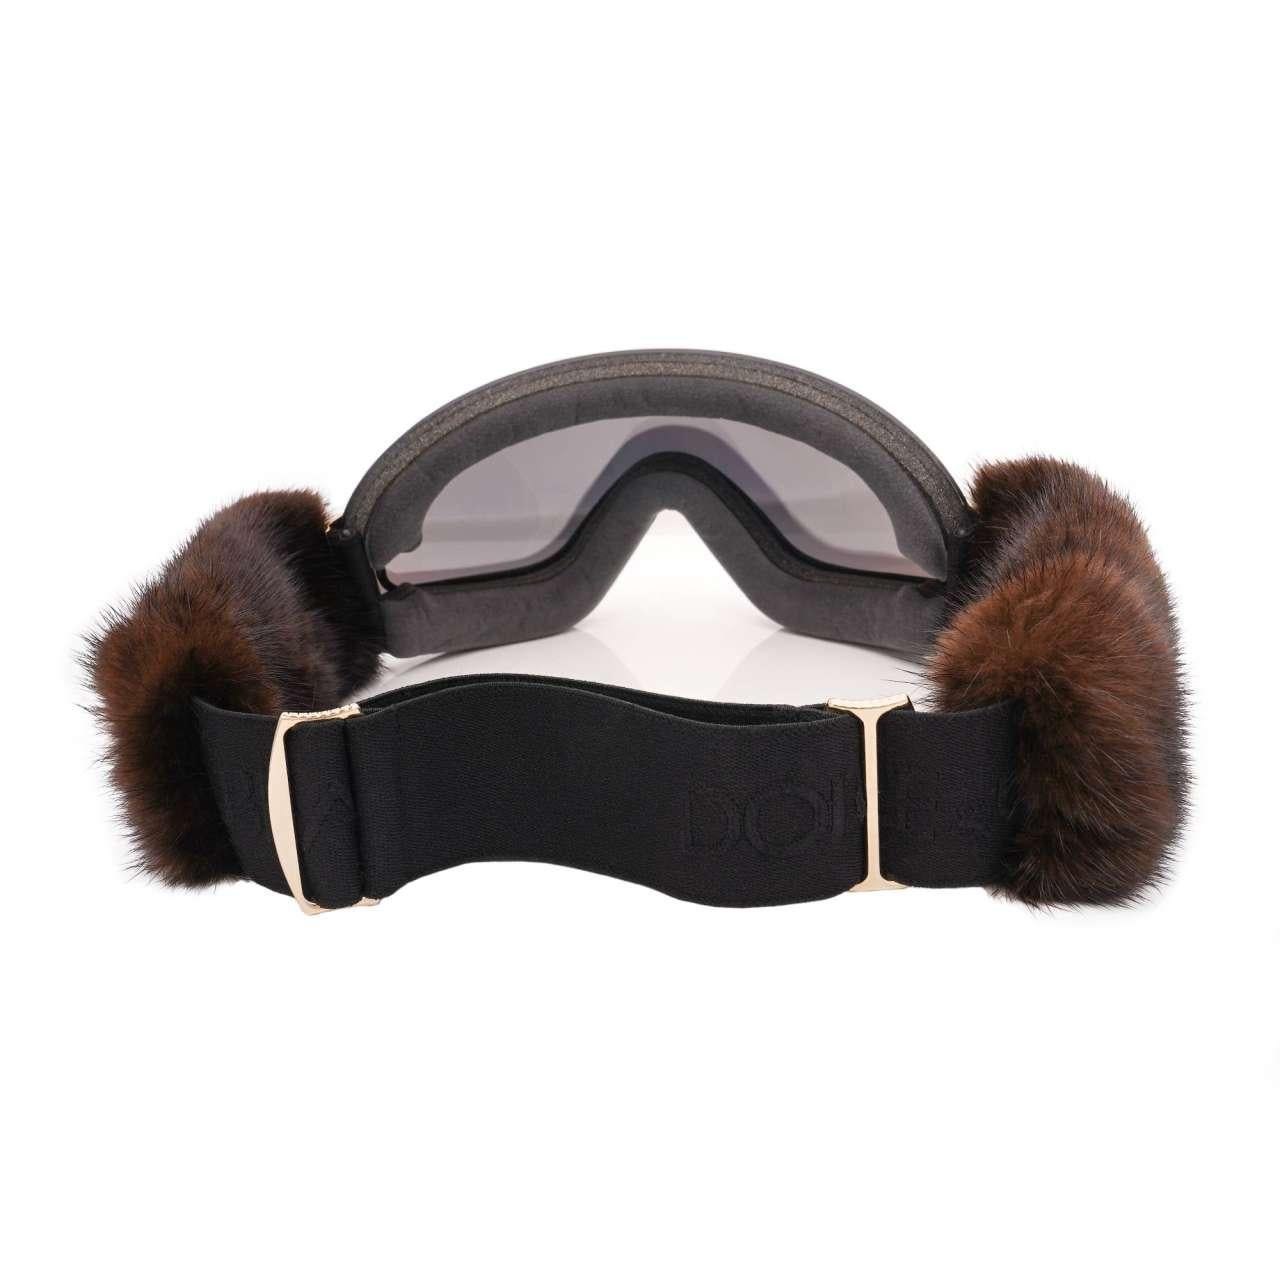 D&G Mirrored Mink Fur Ski Goggles Mask Sunglasses with Bag Green Gold In Excellent Condition For Sale In Erkrath, DE